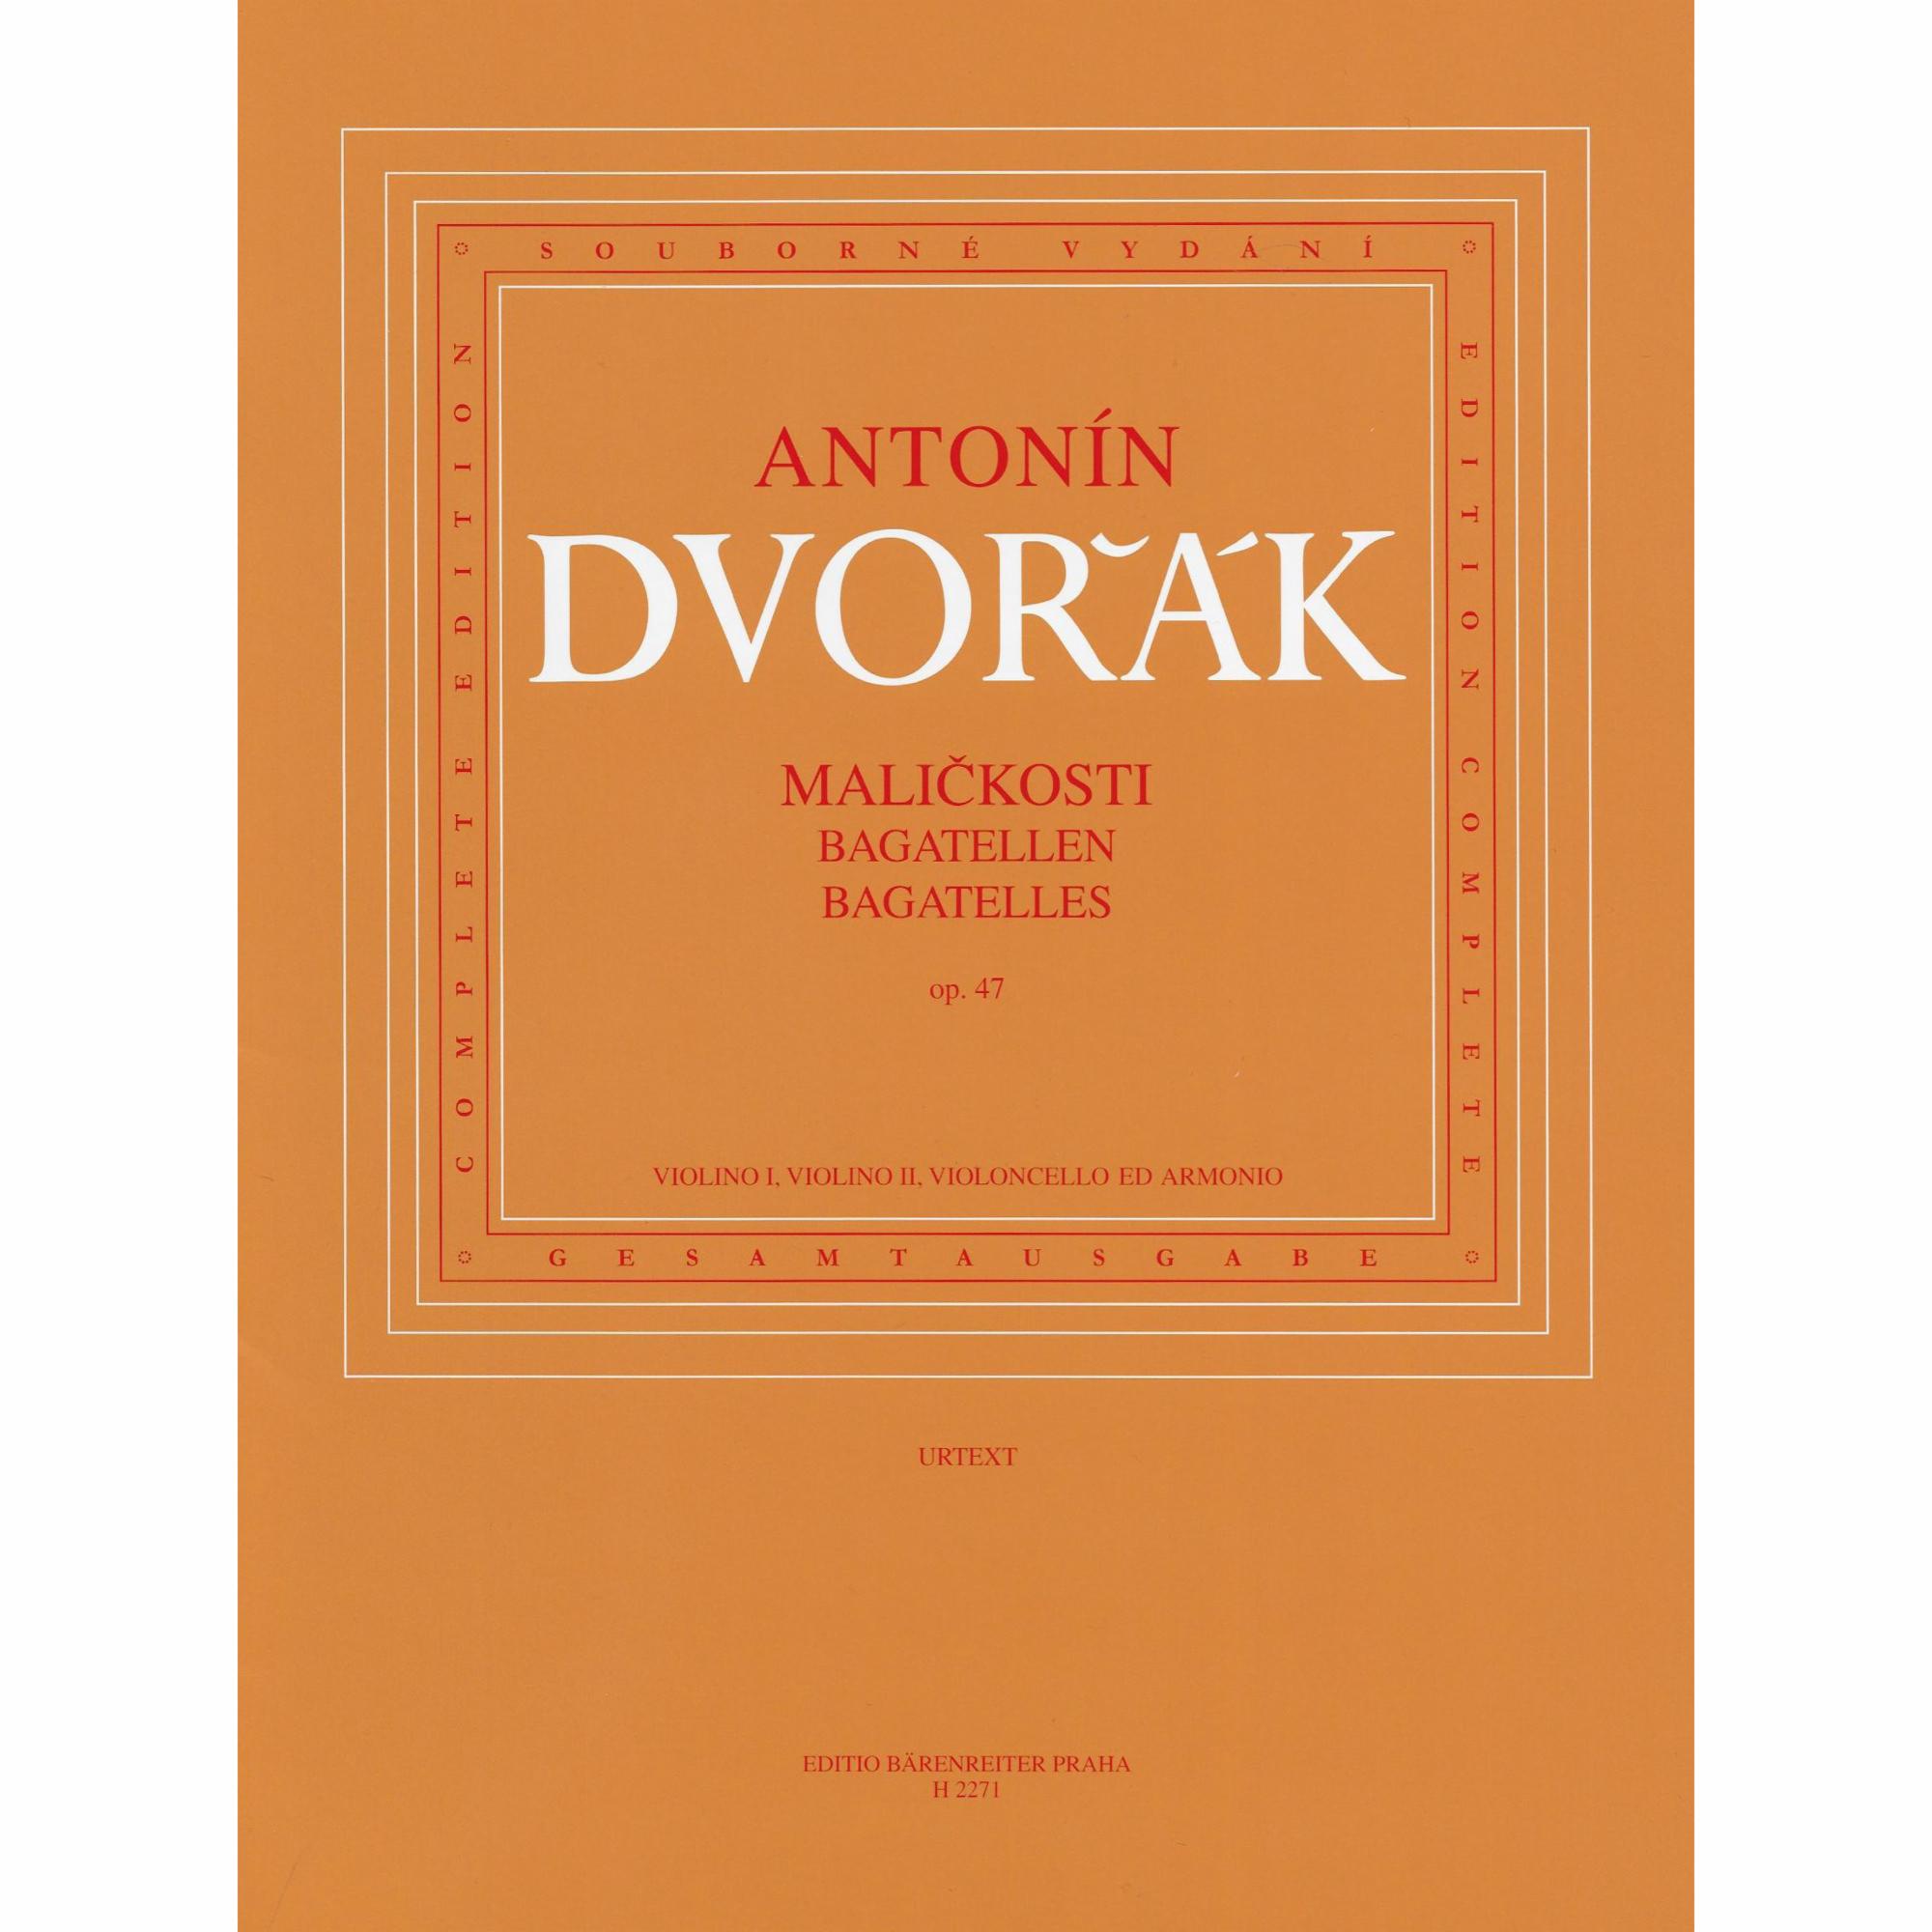 Dvorak -- Bagatelles, Op. 47 for Two Violins, Cello, and Piano